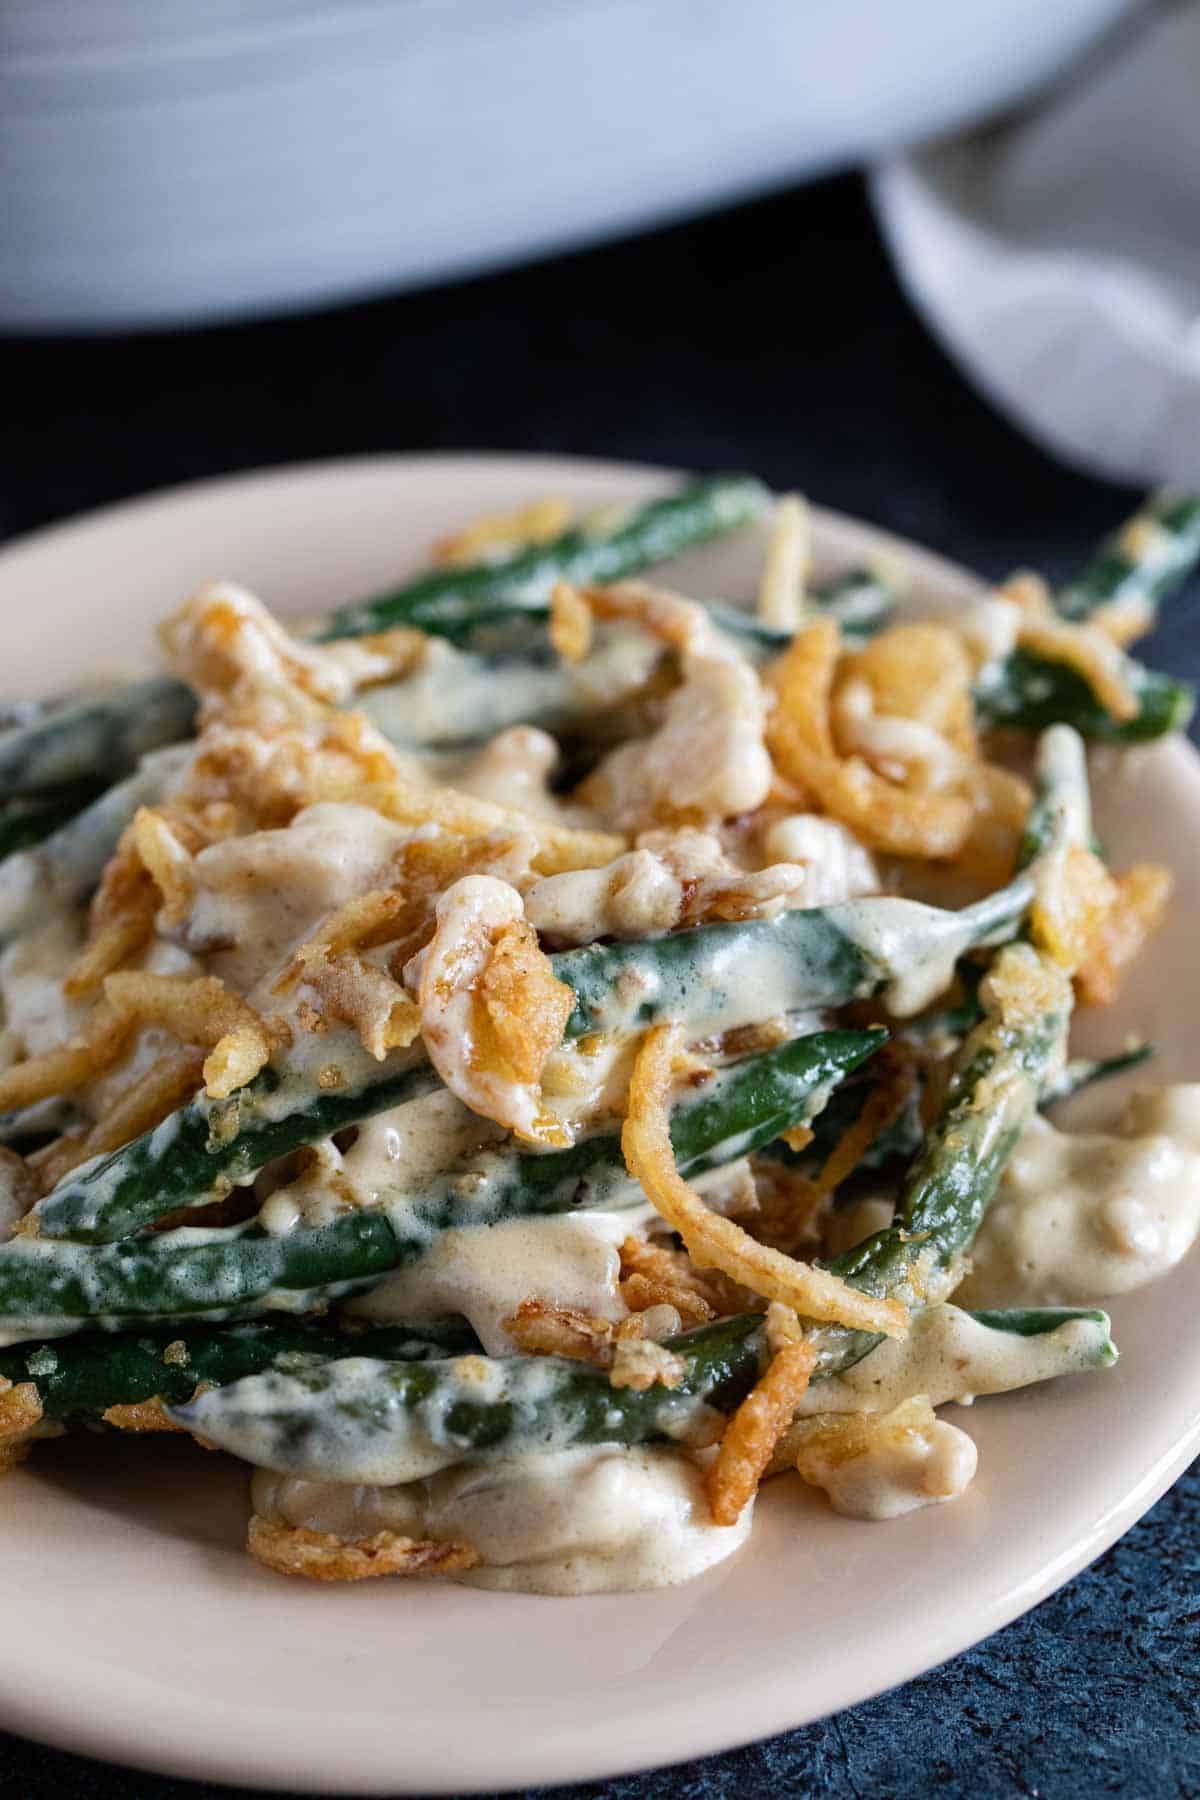 Plate with green bean casserole topped with crispy onions.